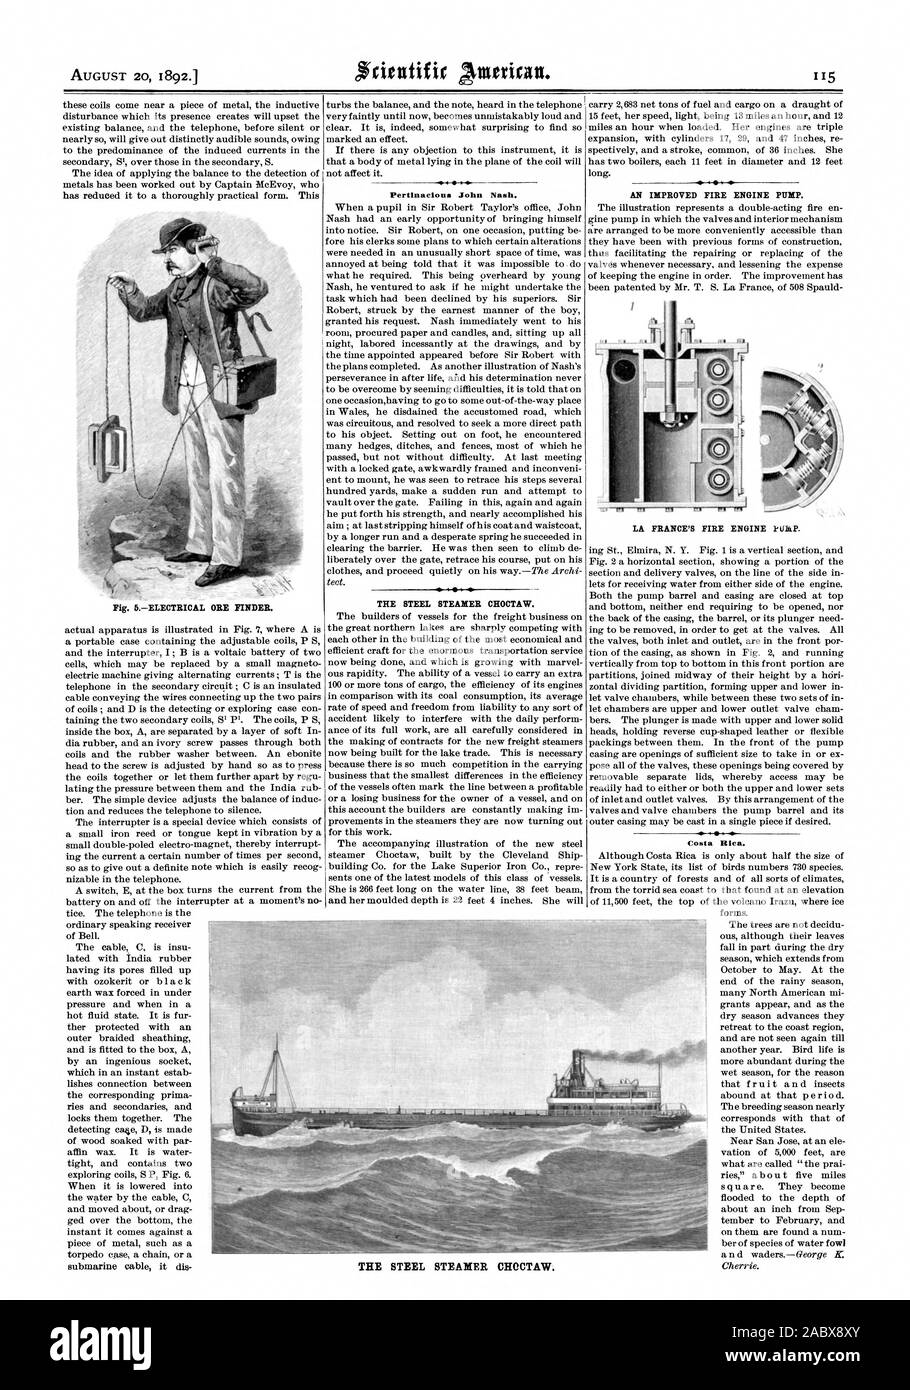 AUGUST 20 1892. Pertinacious John Nash. THE STEEL STEAMER CHOCTAW. AN IMPROVED FIRE ENGINE PUMP. Costa Rica. THE STEEL STEAMER CHOCTAW., scientific american, 1892-08-20 Stock Photo